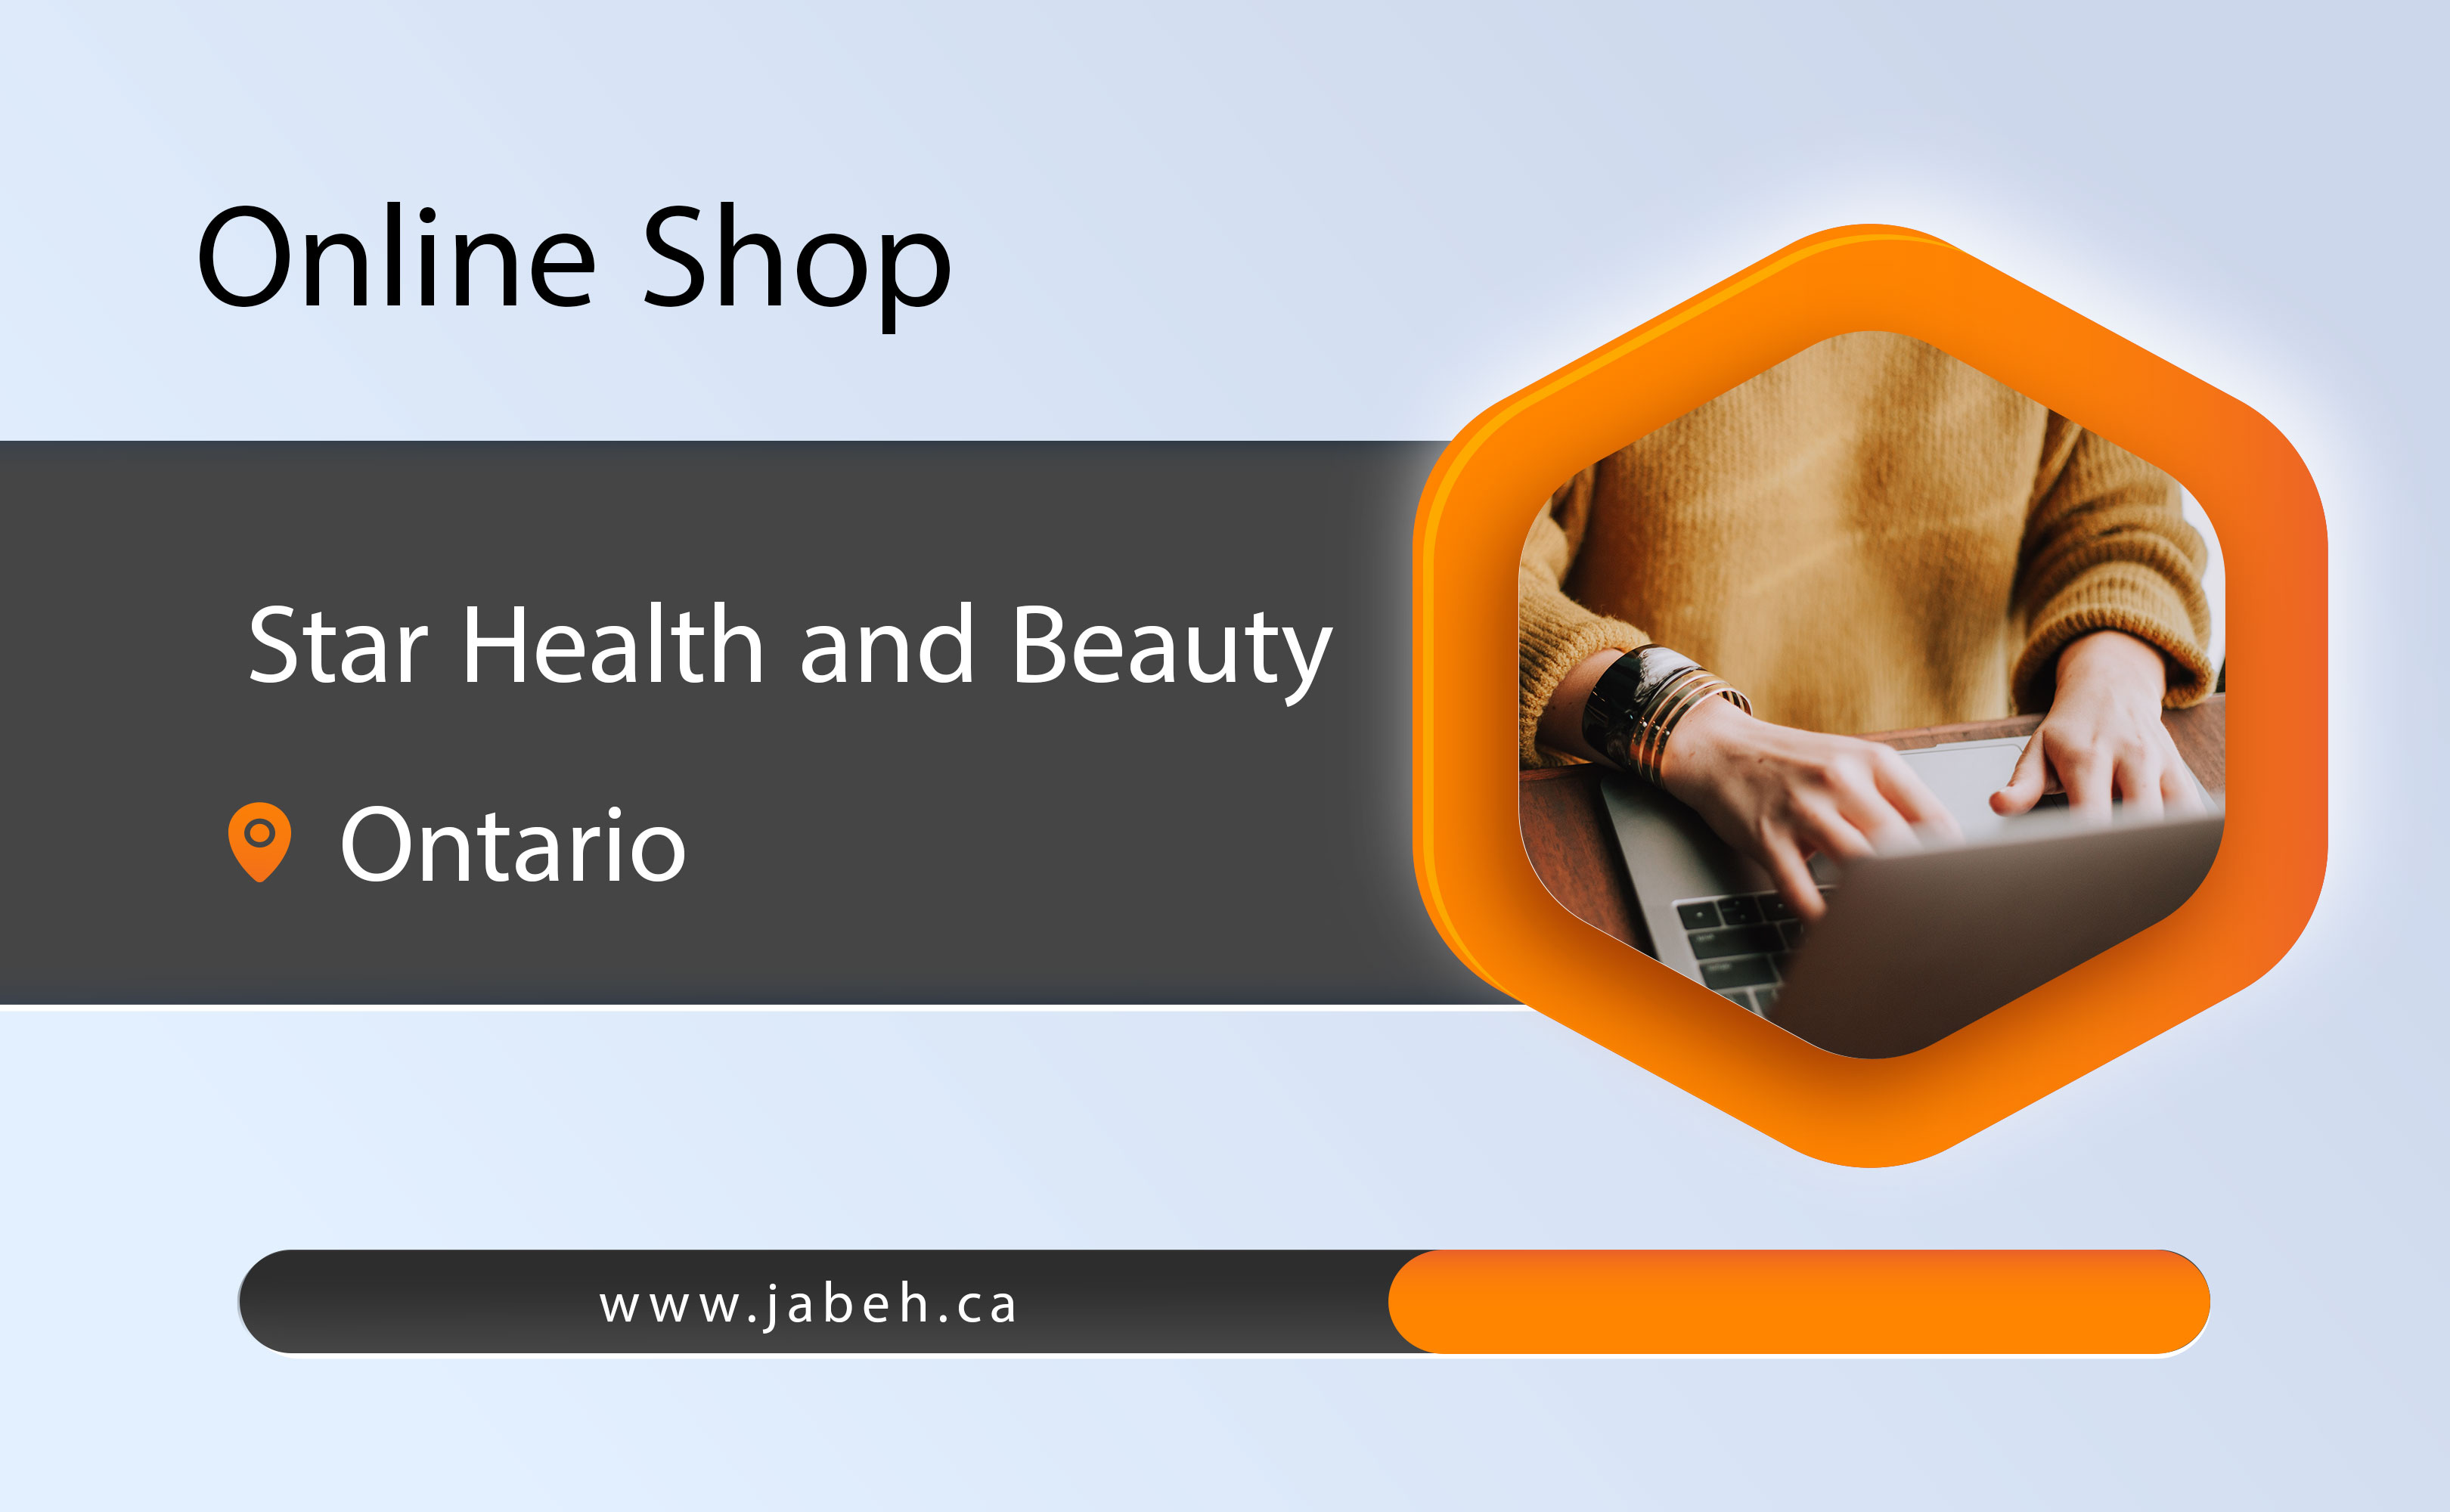 Star Health and Beauty Online Store in Ontario